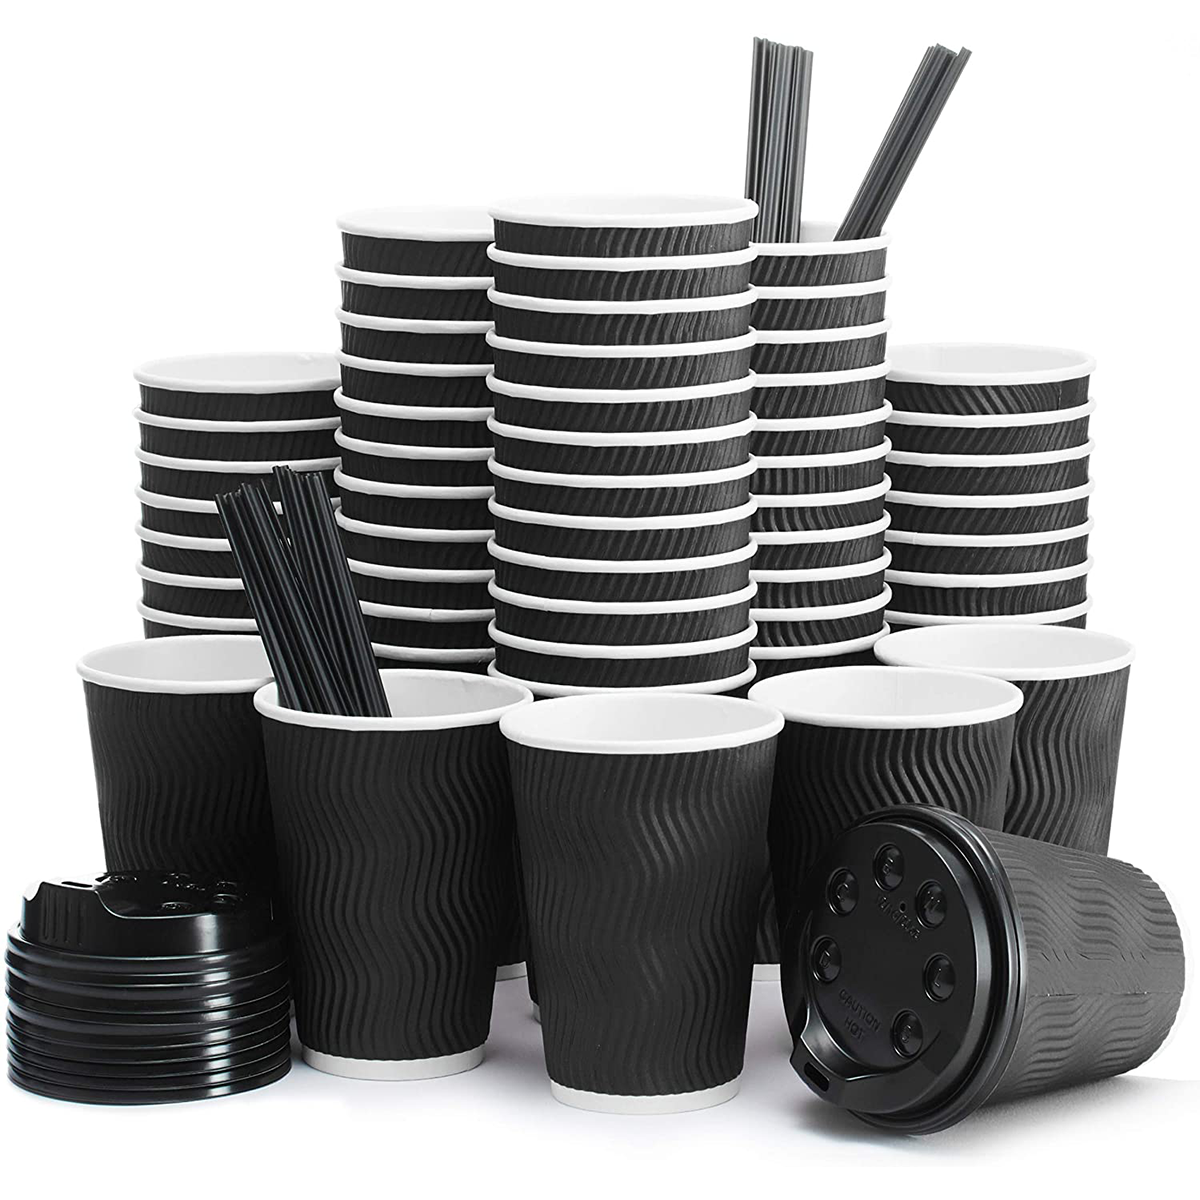 https://www.tuobopackaging.com/ripple-wall-paper-coffee-cups-custom-design-for-hot-drinks-product/